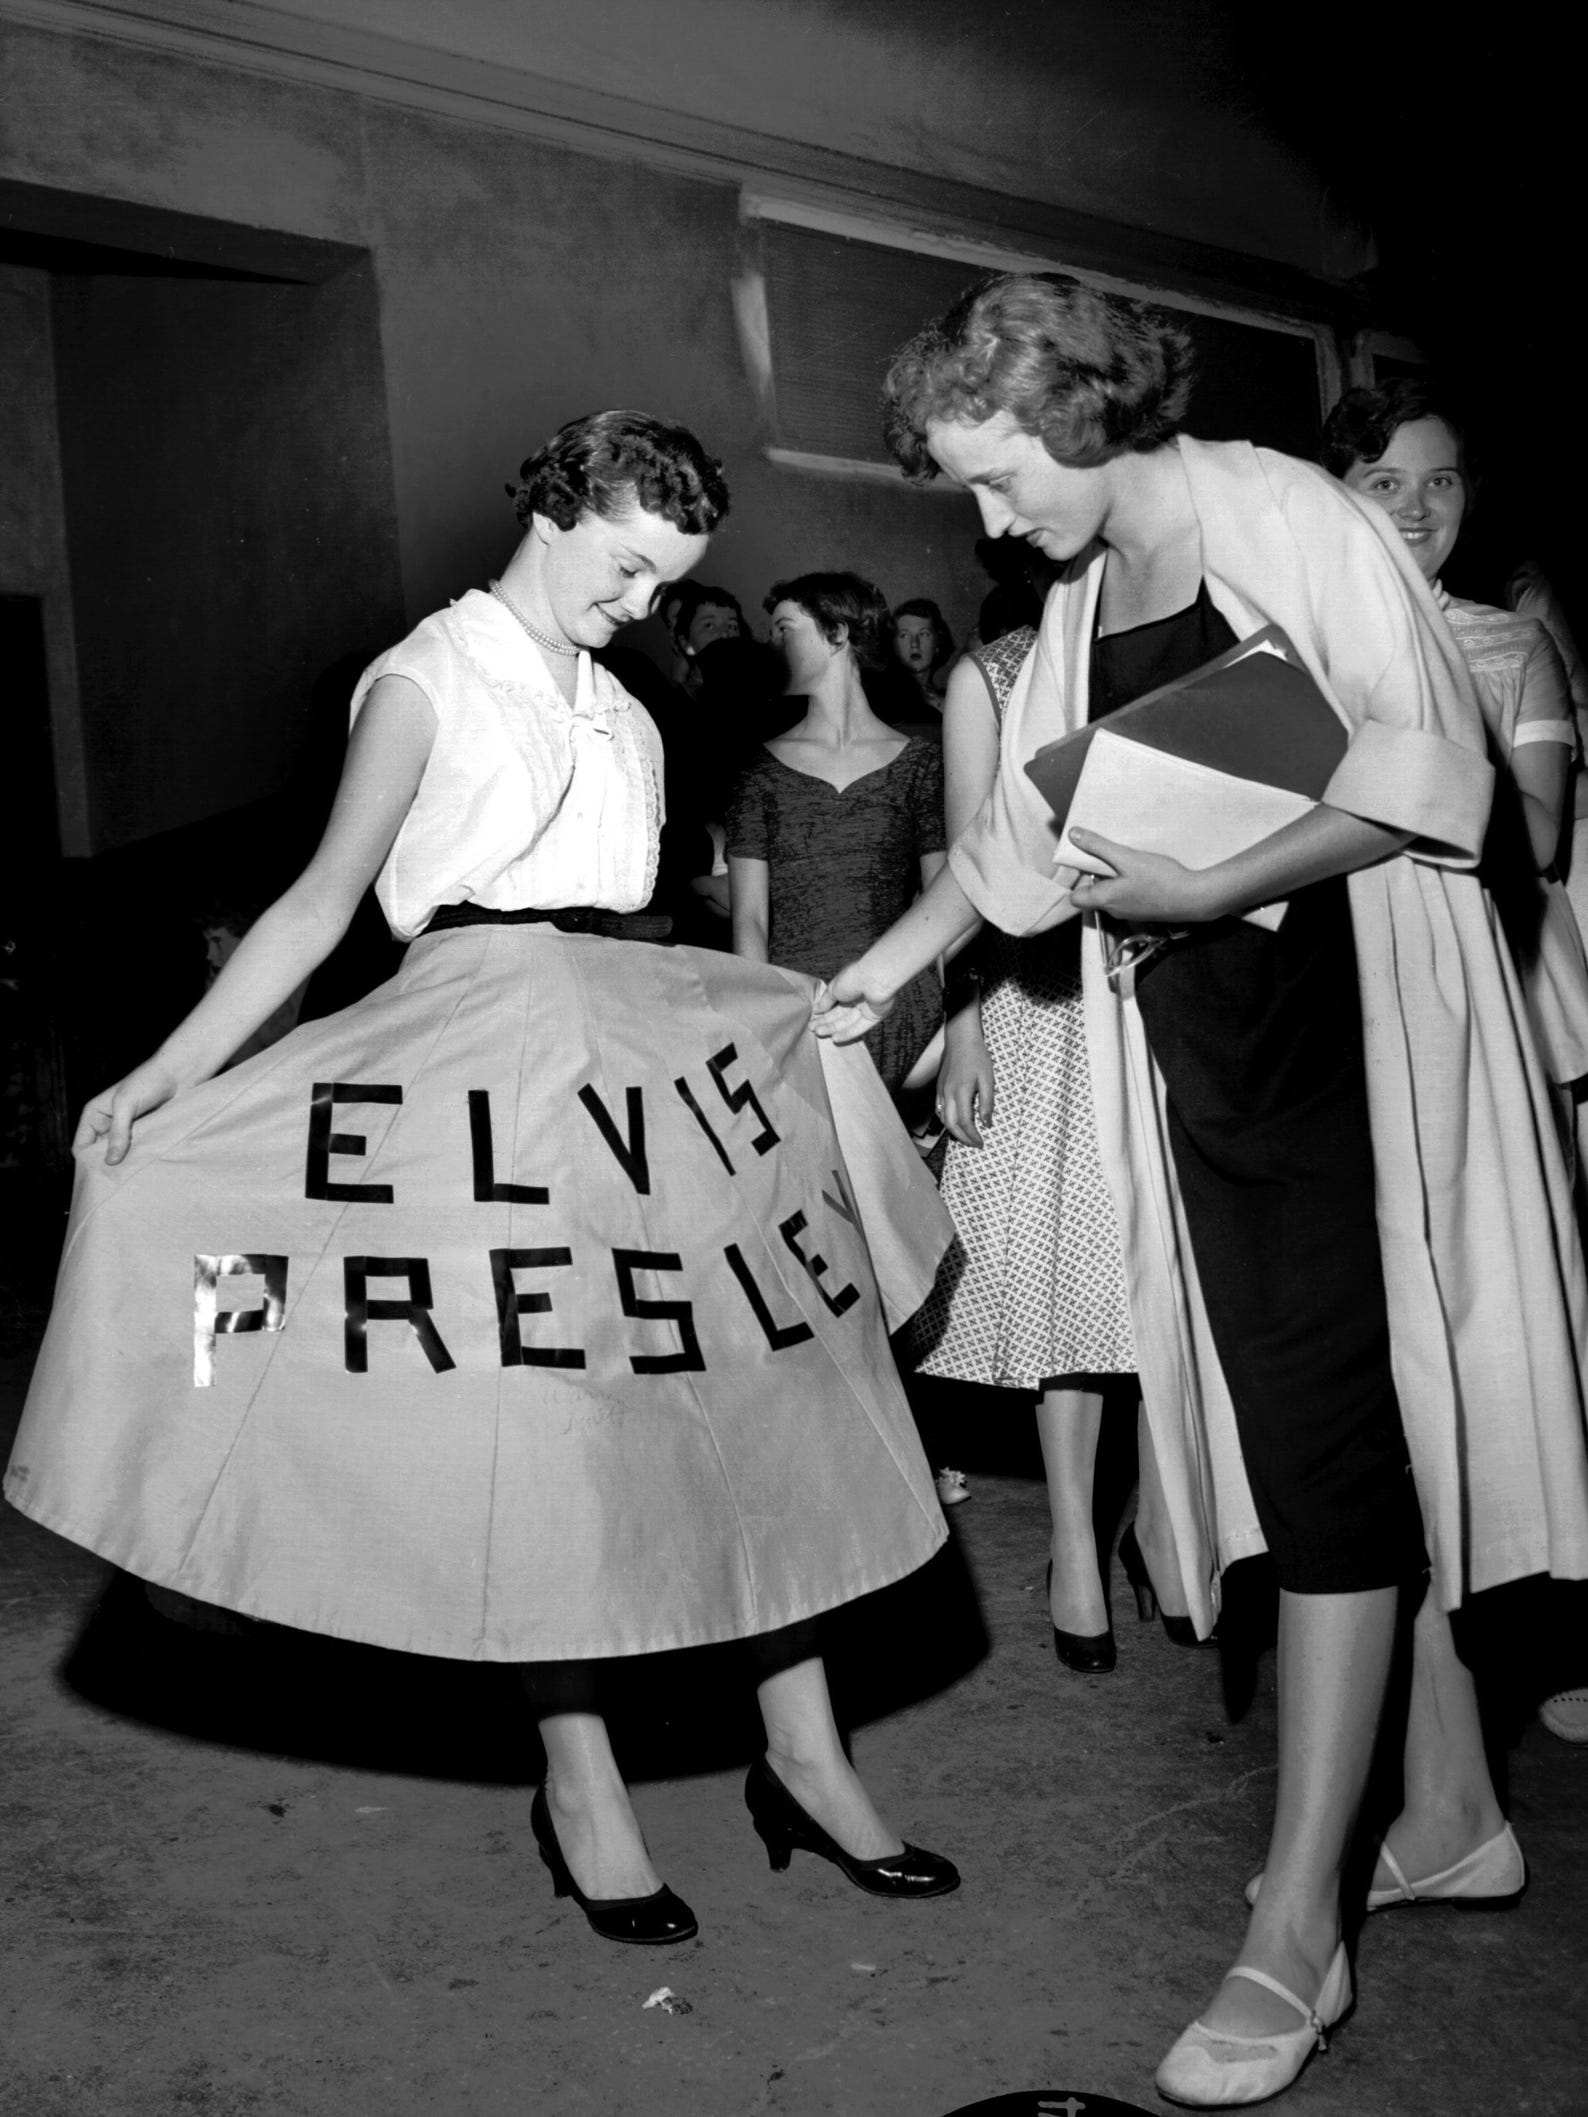 A fan shows off her dress at Elvis Presley's concert at Ellis Auditorium in 1956. More than 7,000 people jammed Ellis Auditorium on the night of May 15 to stomp, shudder, shriek and sigh as a young Elvis writhed his way through a rock 'n' roll repertoire. He was the blockbuster of Bob Neal's Cotton Picking Jamboree, a feature of Cotton Carnival opening night.